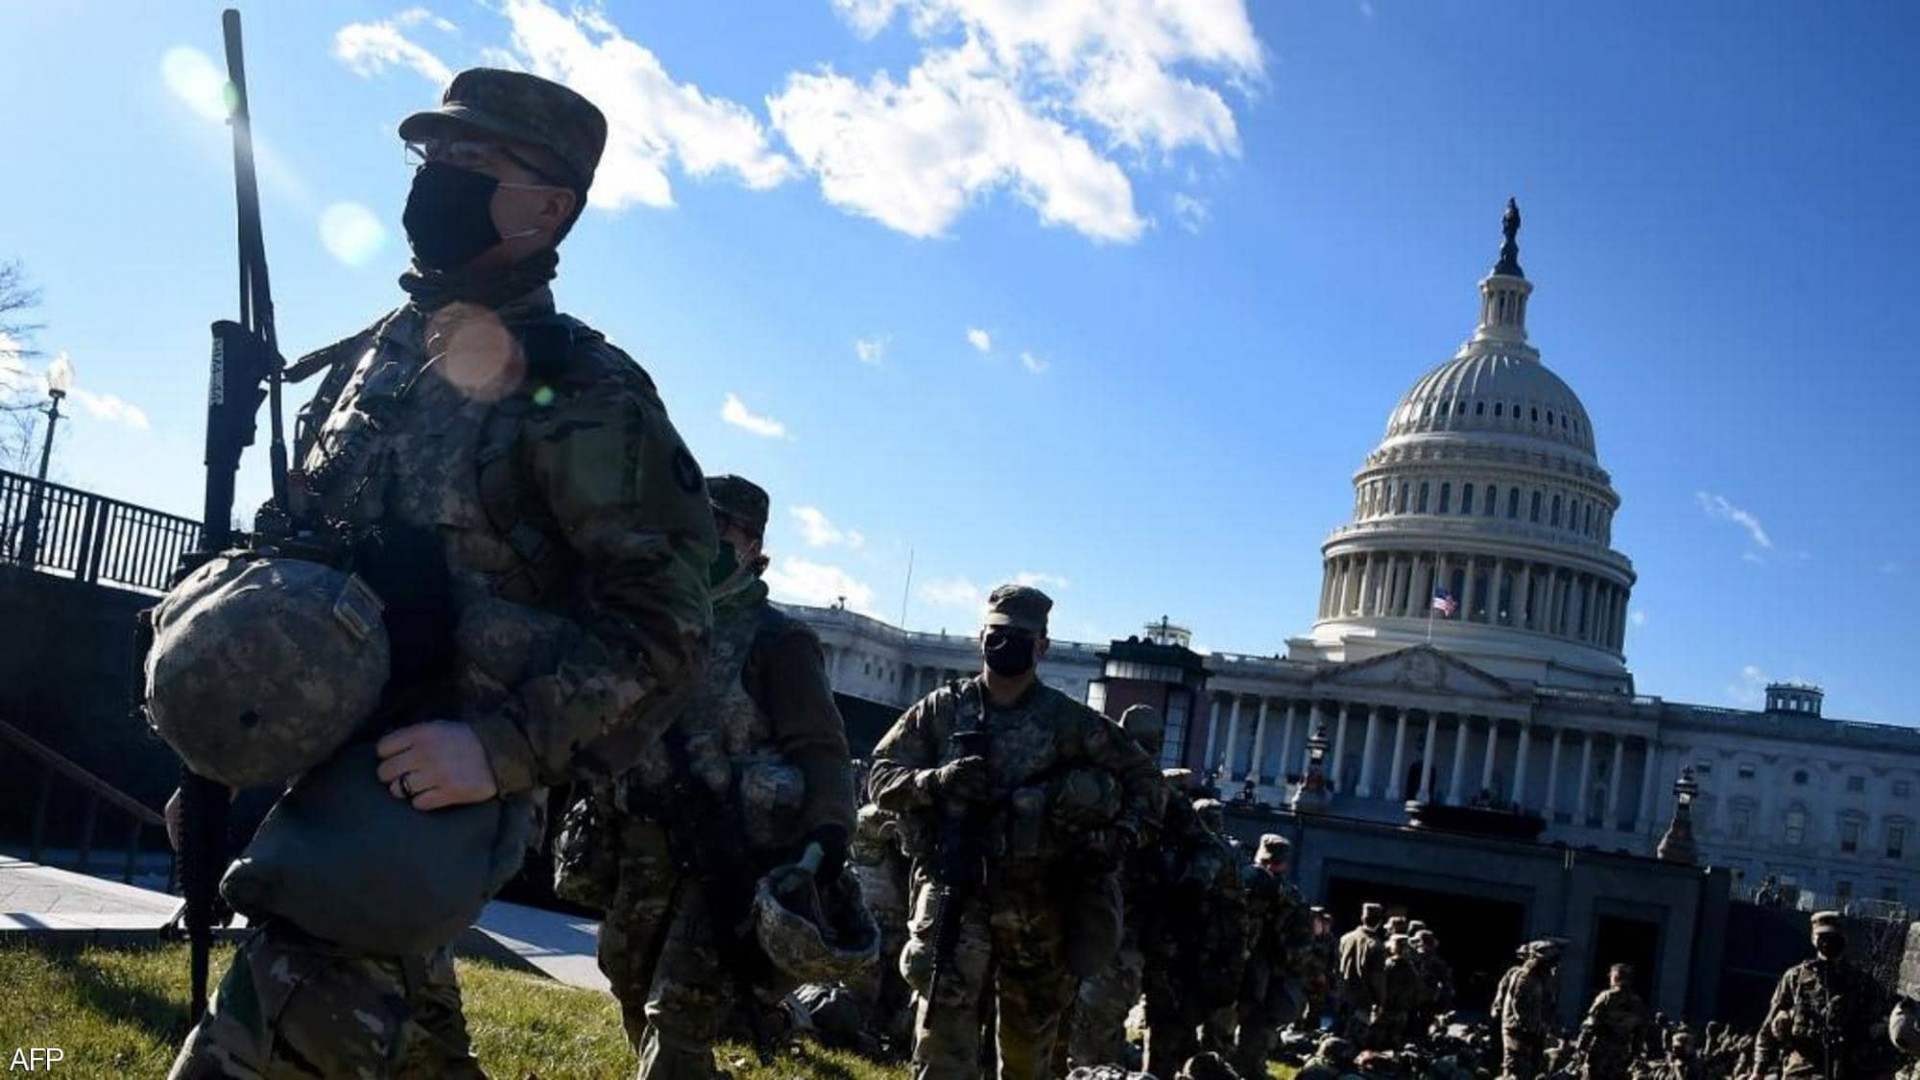 US National Guard troops removed from inaugural protection for possible links to extremist groups